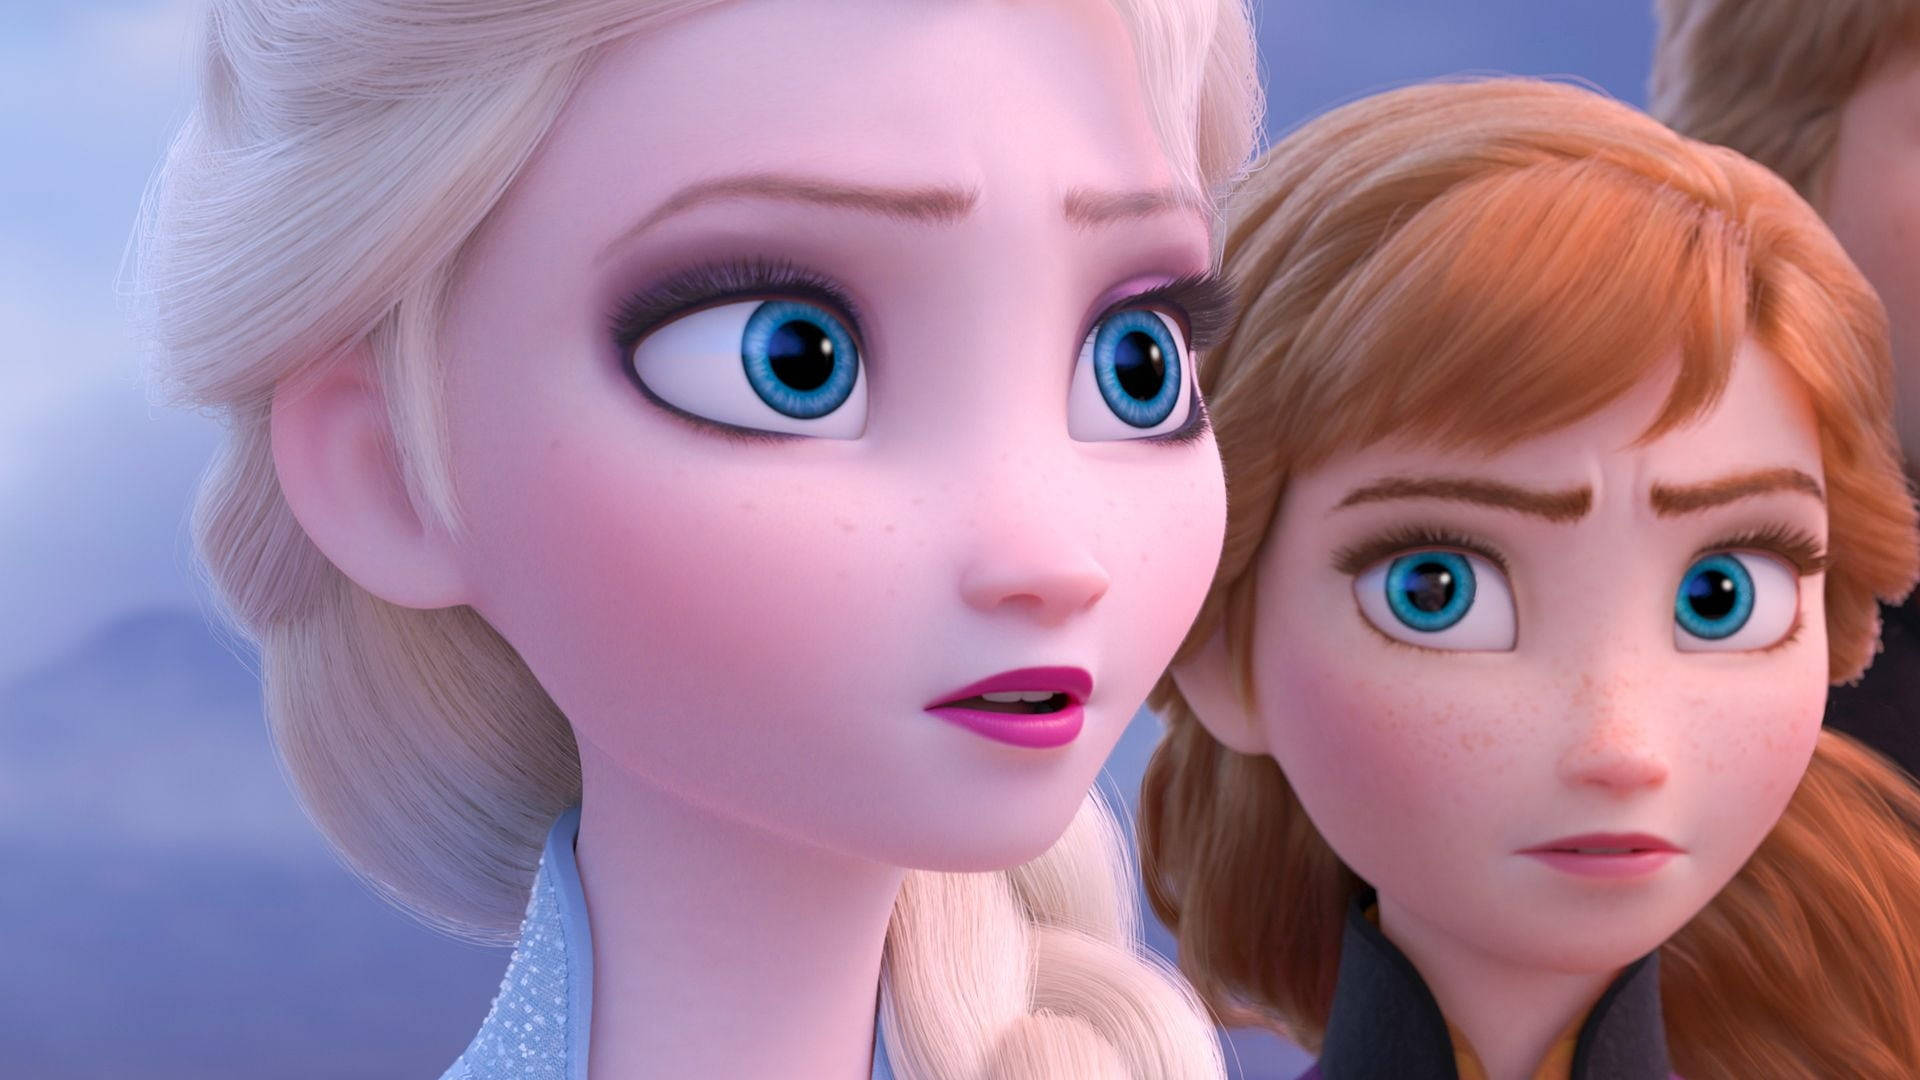 Endearing Sisters: Elsa And Anna Strategizing Background